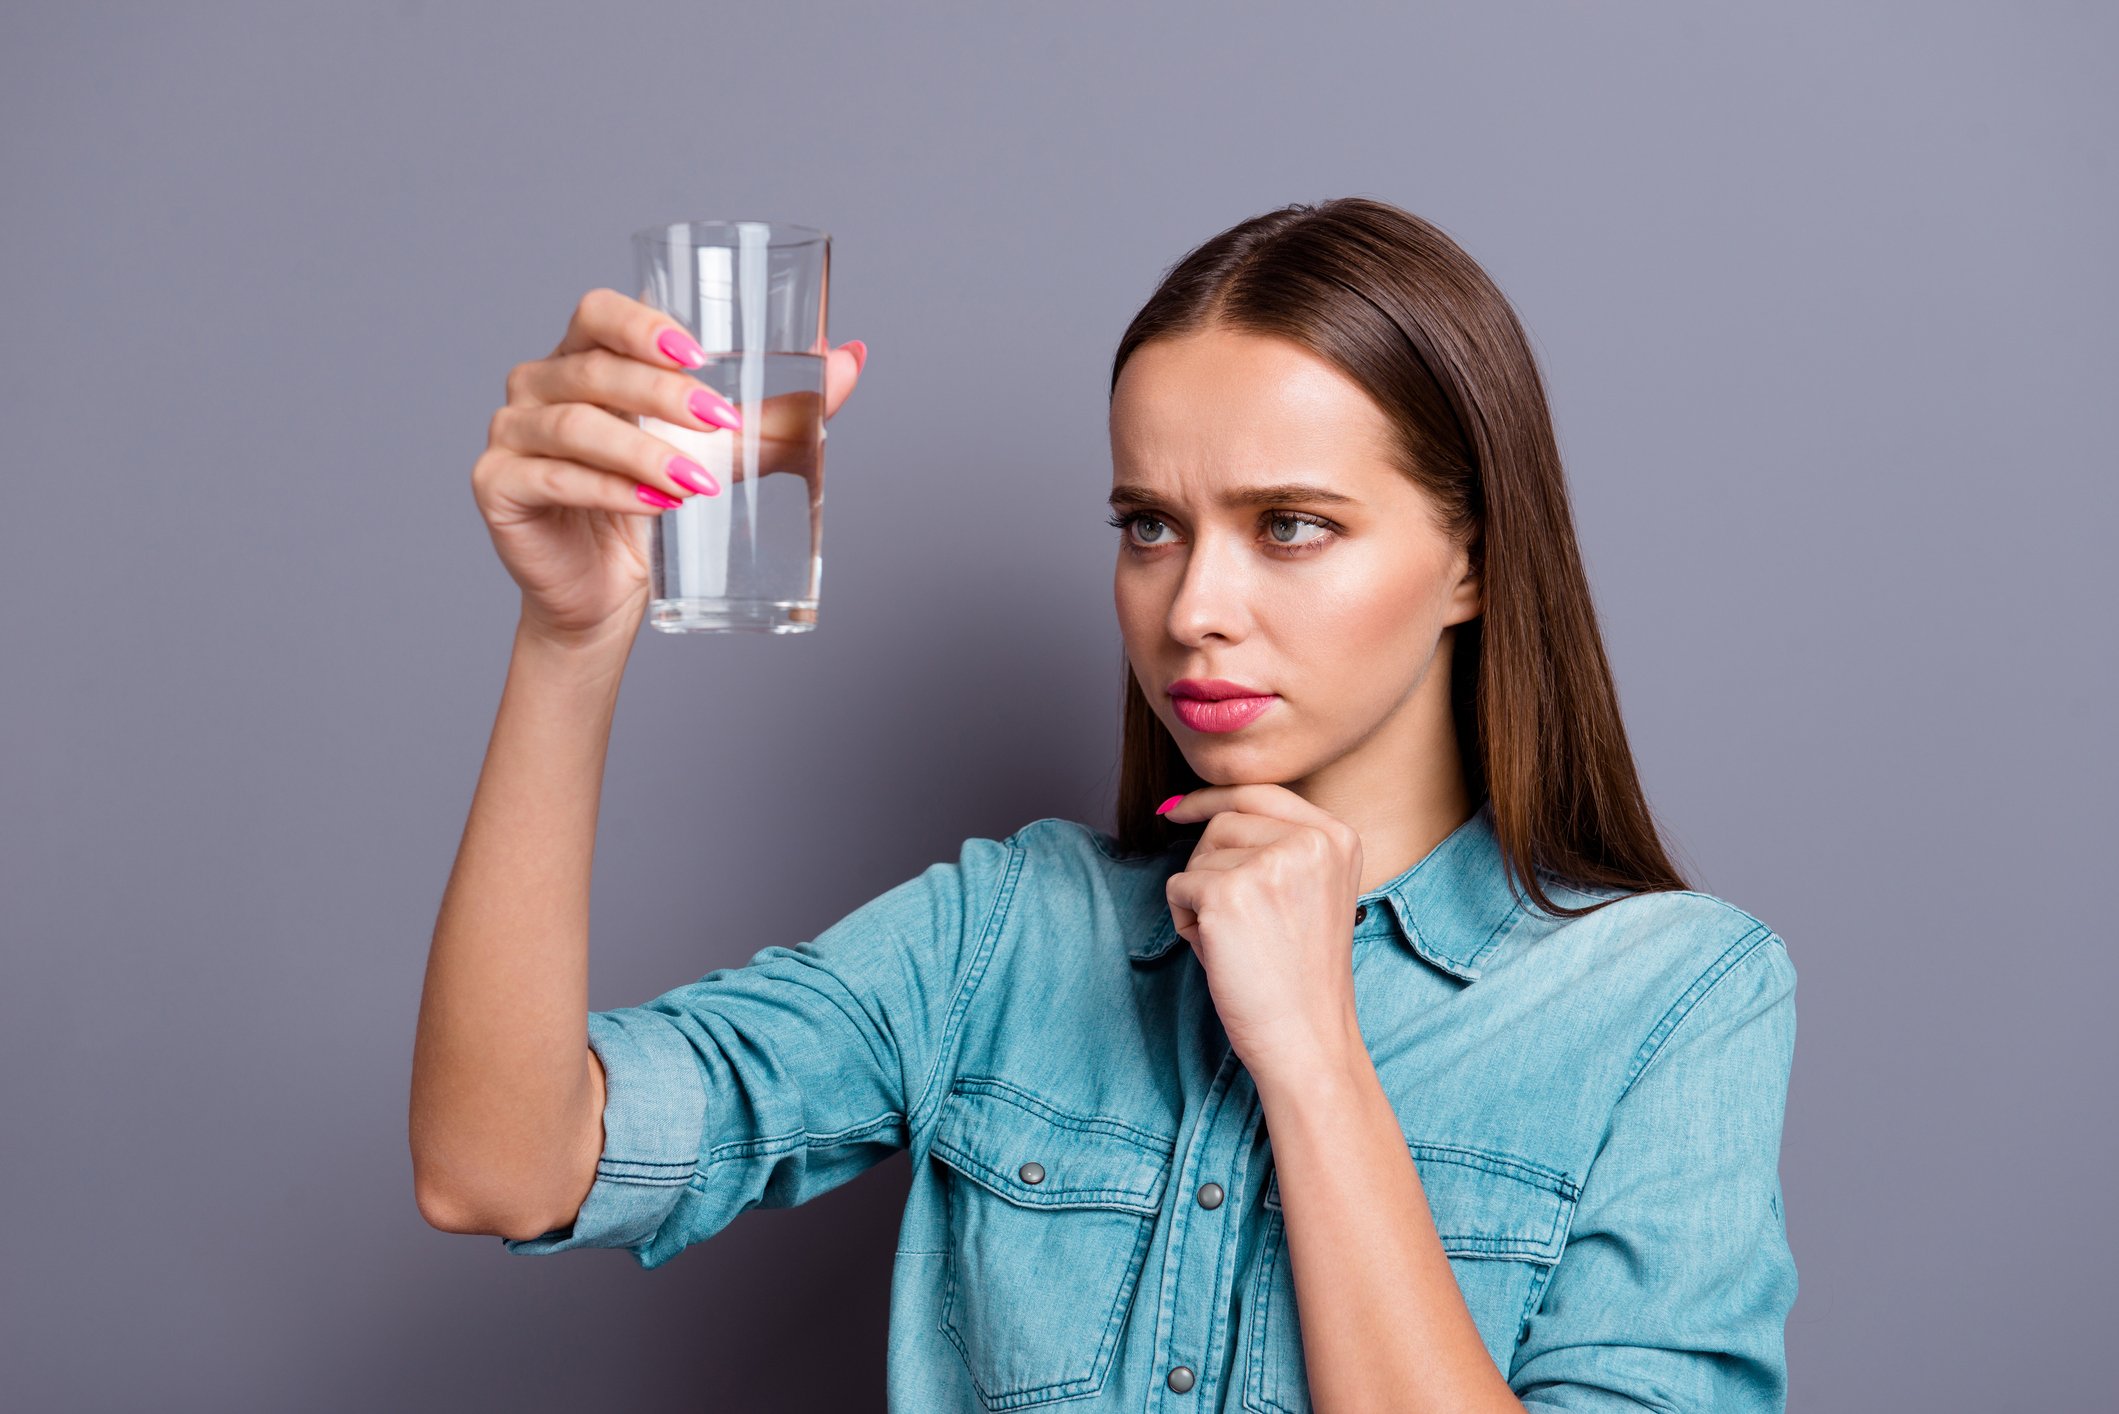 woman looking at a glass of water